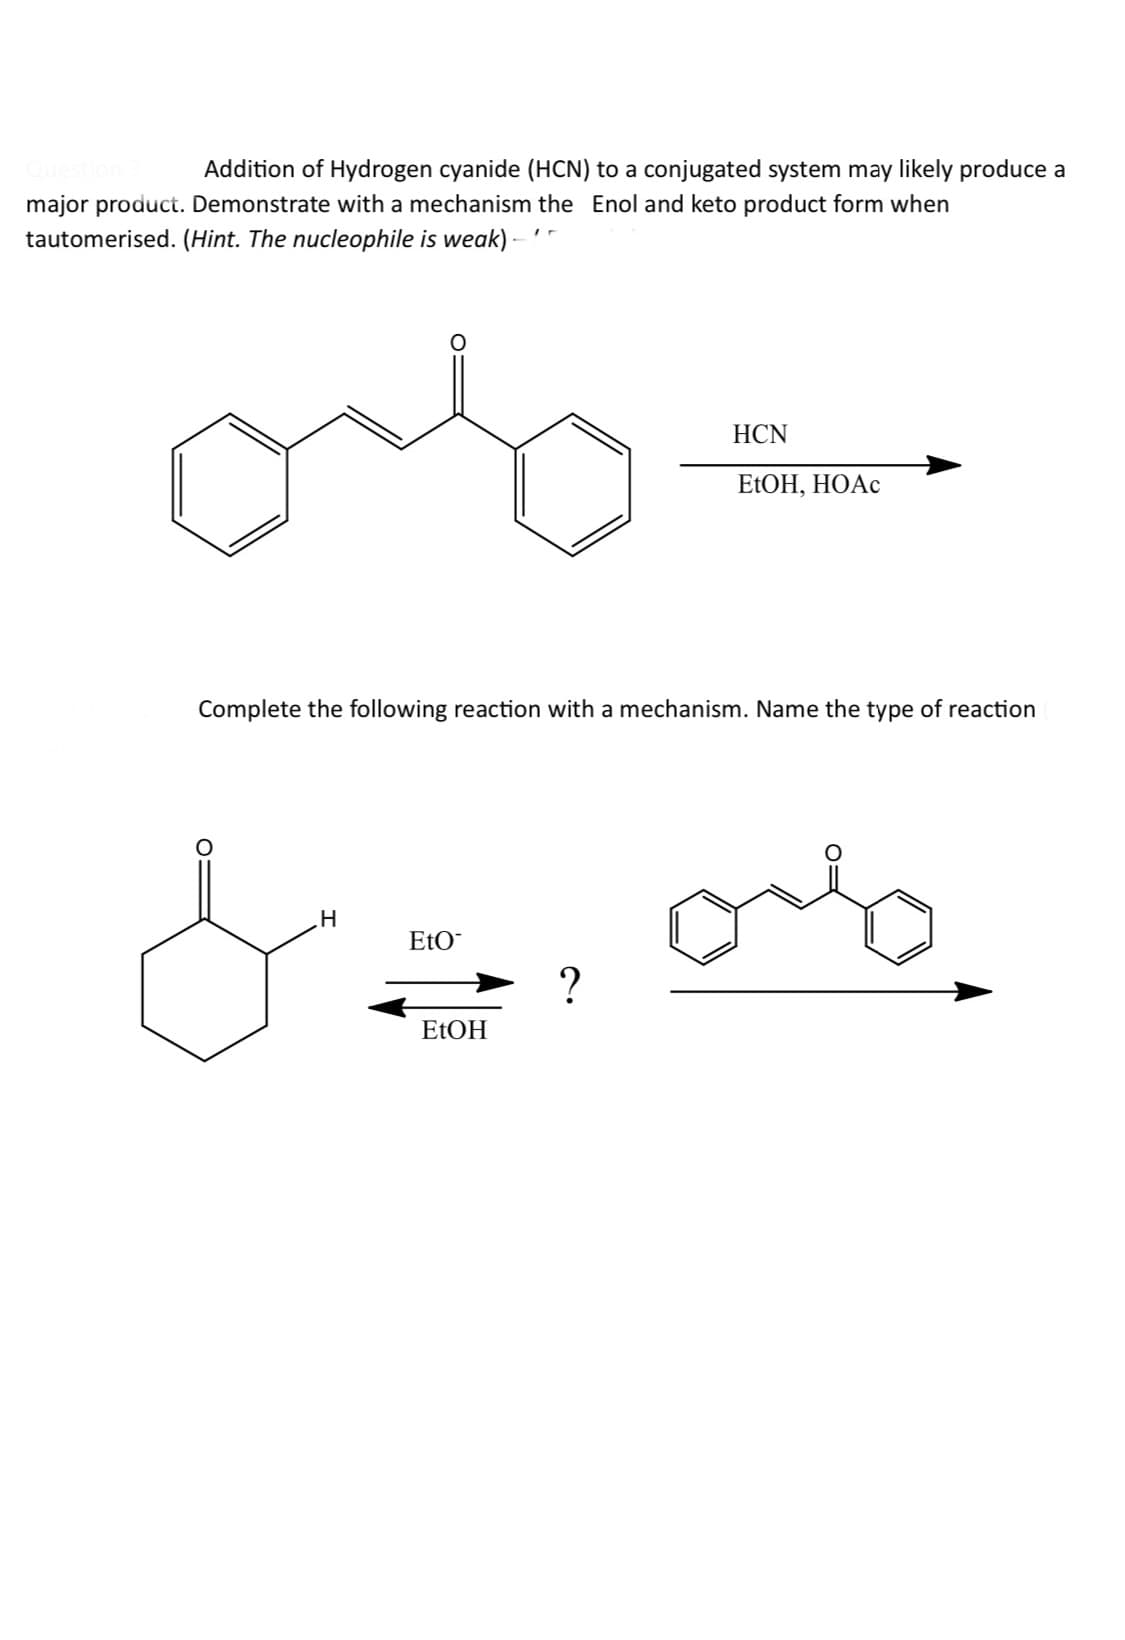 Question
Addition of Hydrogen cyanide (HCN) to a conjugated system may likely produce a
major product. Demonstrate with a mechanism the Enol and keto product form when
tautomerised. (Hint. The nucleophile is weak) - '-
HCN
EtOH, HOAc
Complete the following reaction with a mechanism. Name the type of reaction
لا
H
EtO
EtOH
?
ов